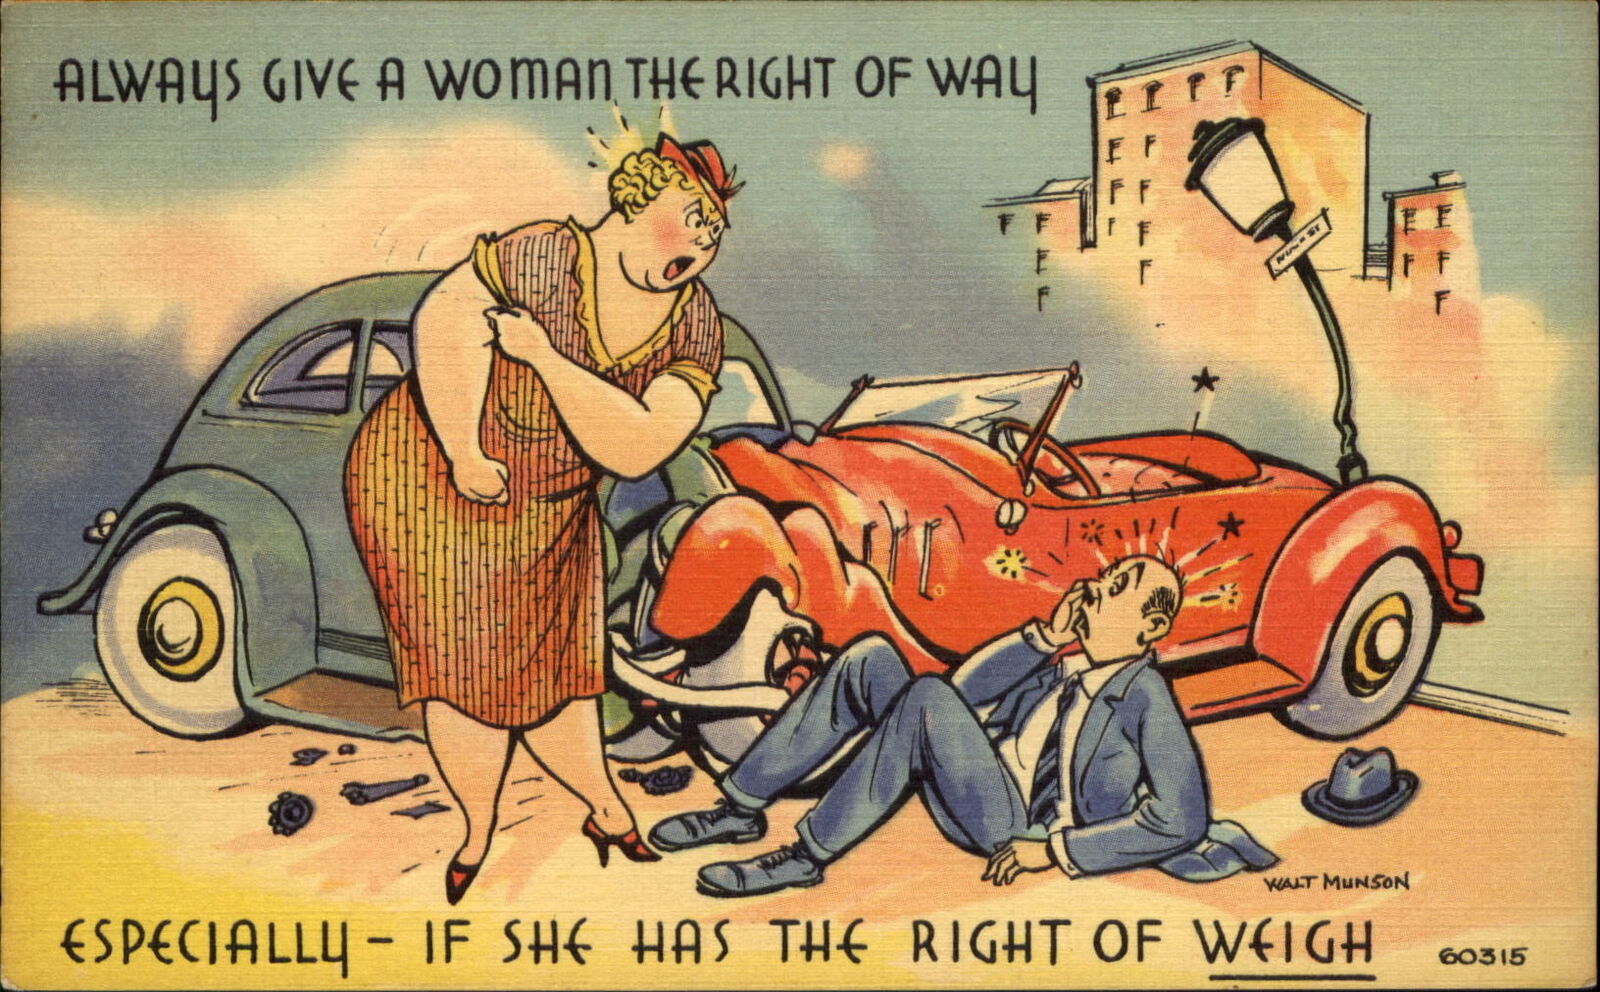 Car accident Give Women Right of Way if She Has Right of Weigh ~ pun comic 1940s